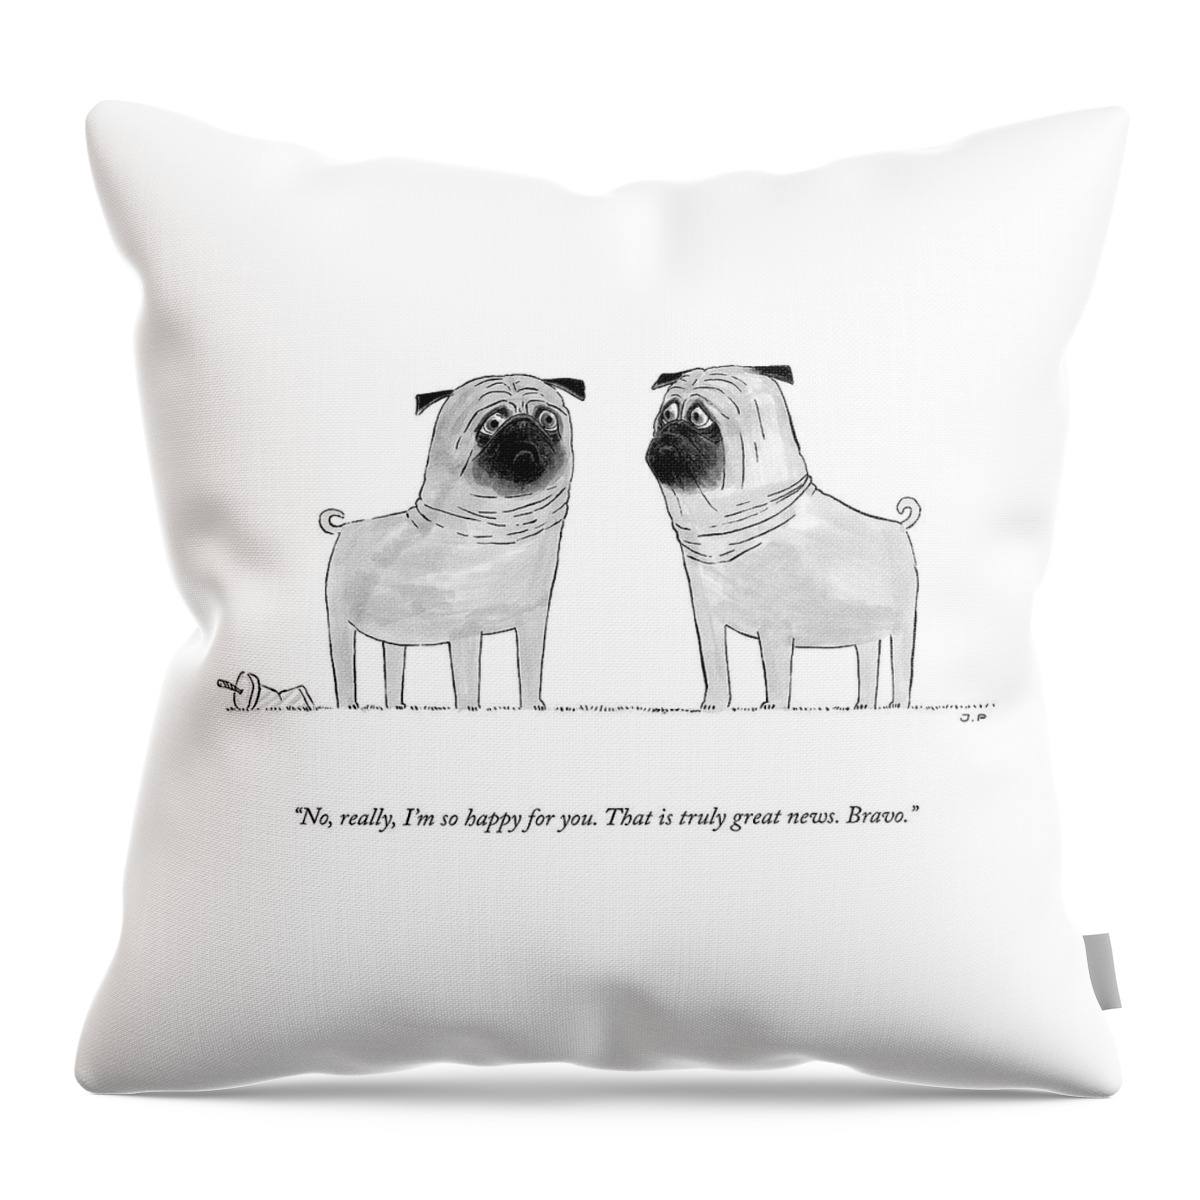 I'm So Happy For You Throw Pillow